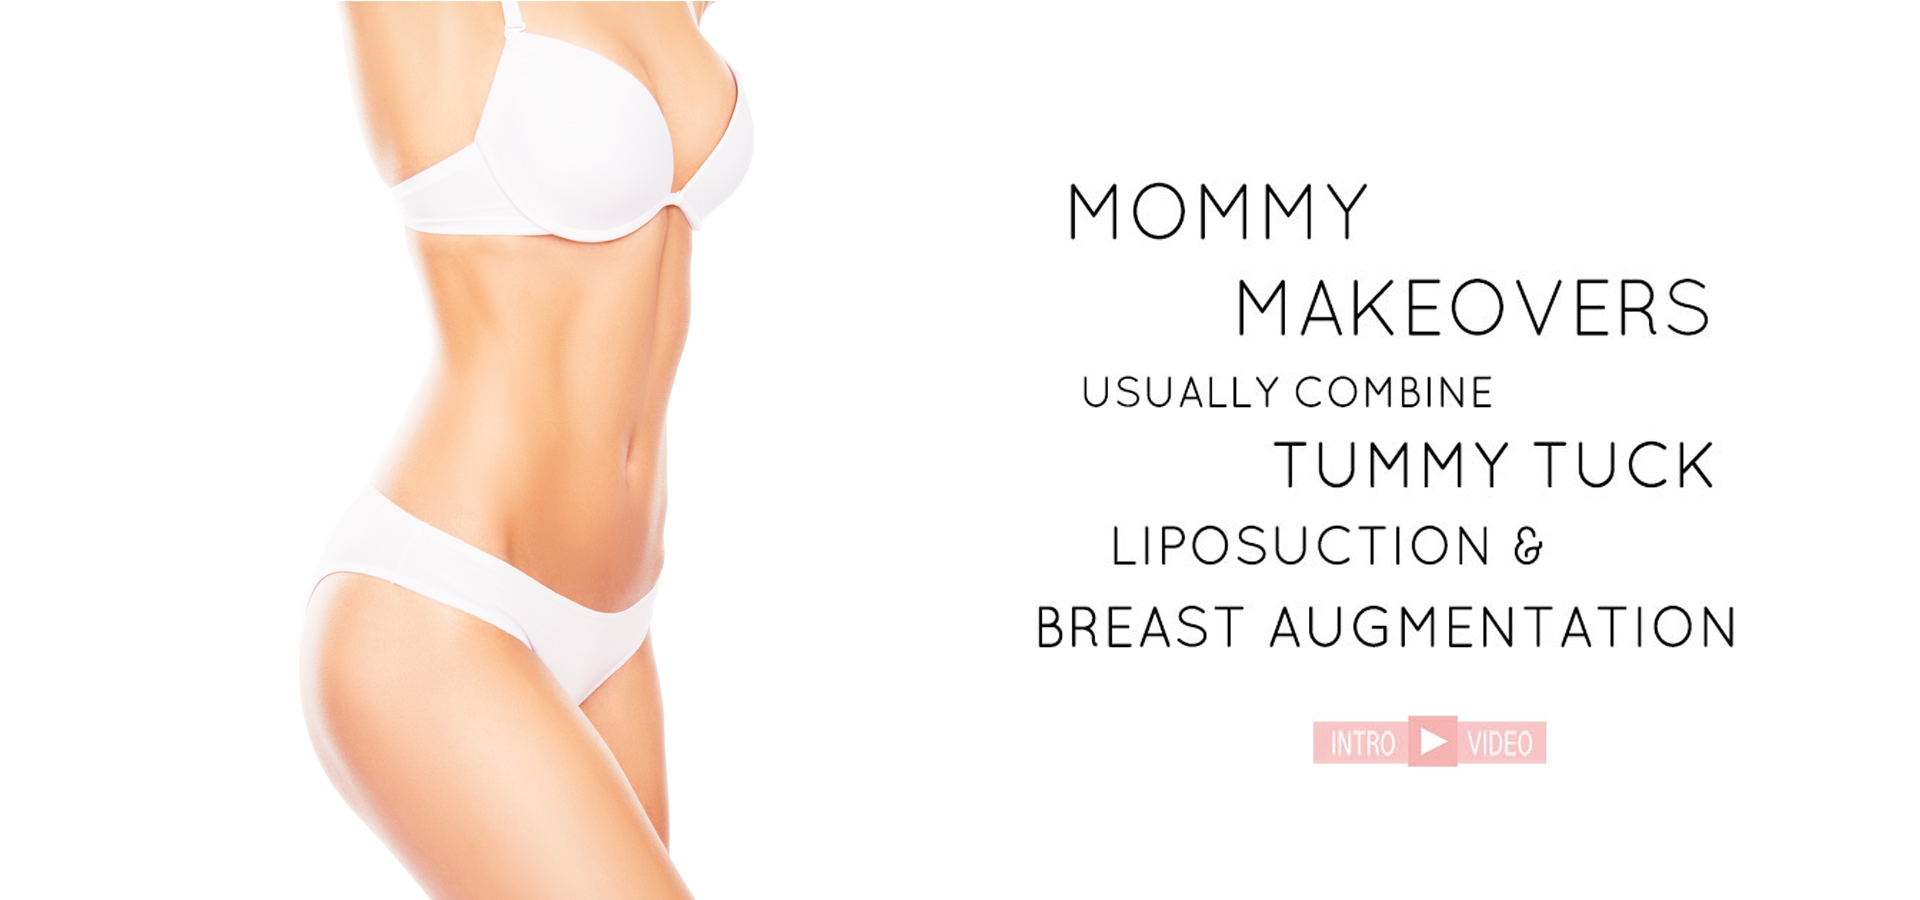 Liposuction Mommy Makeover NYC - After Pregnancy Body